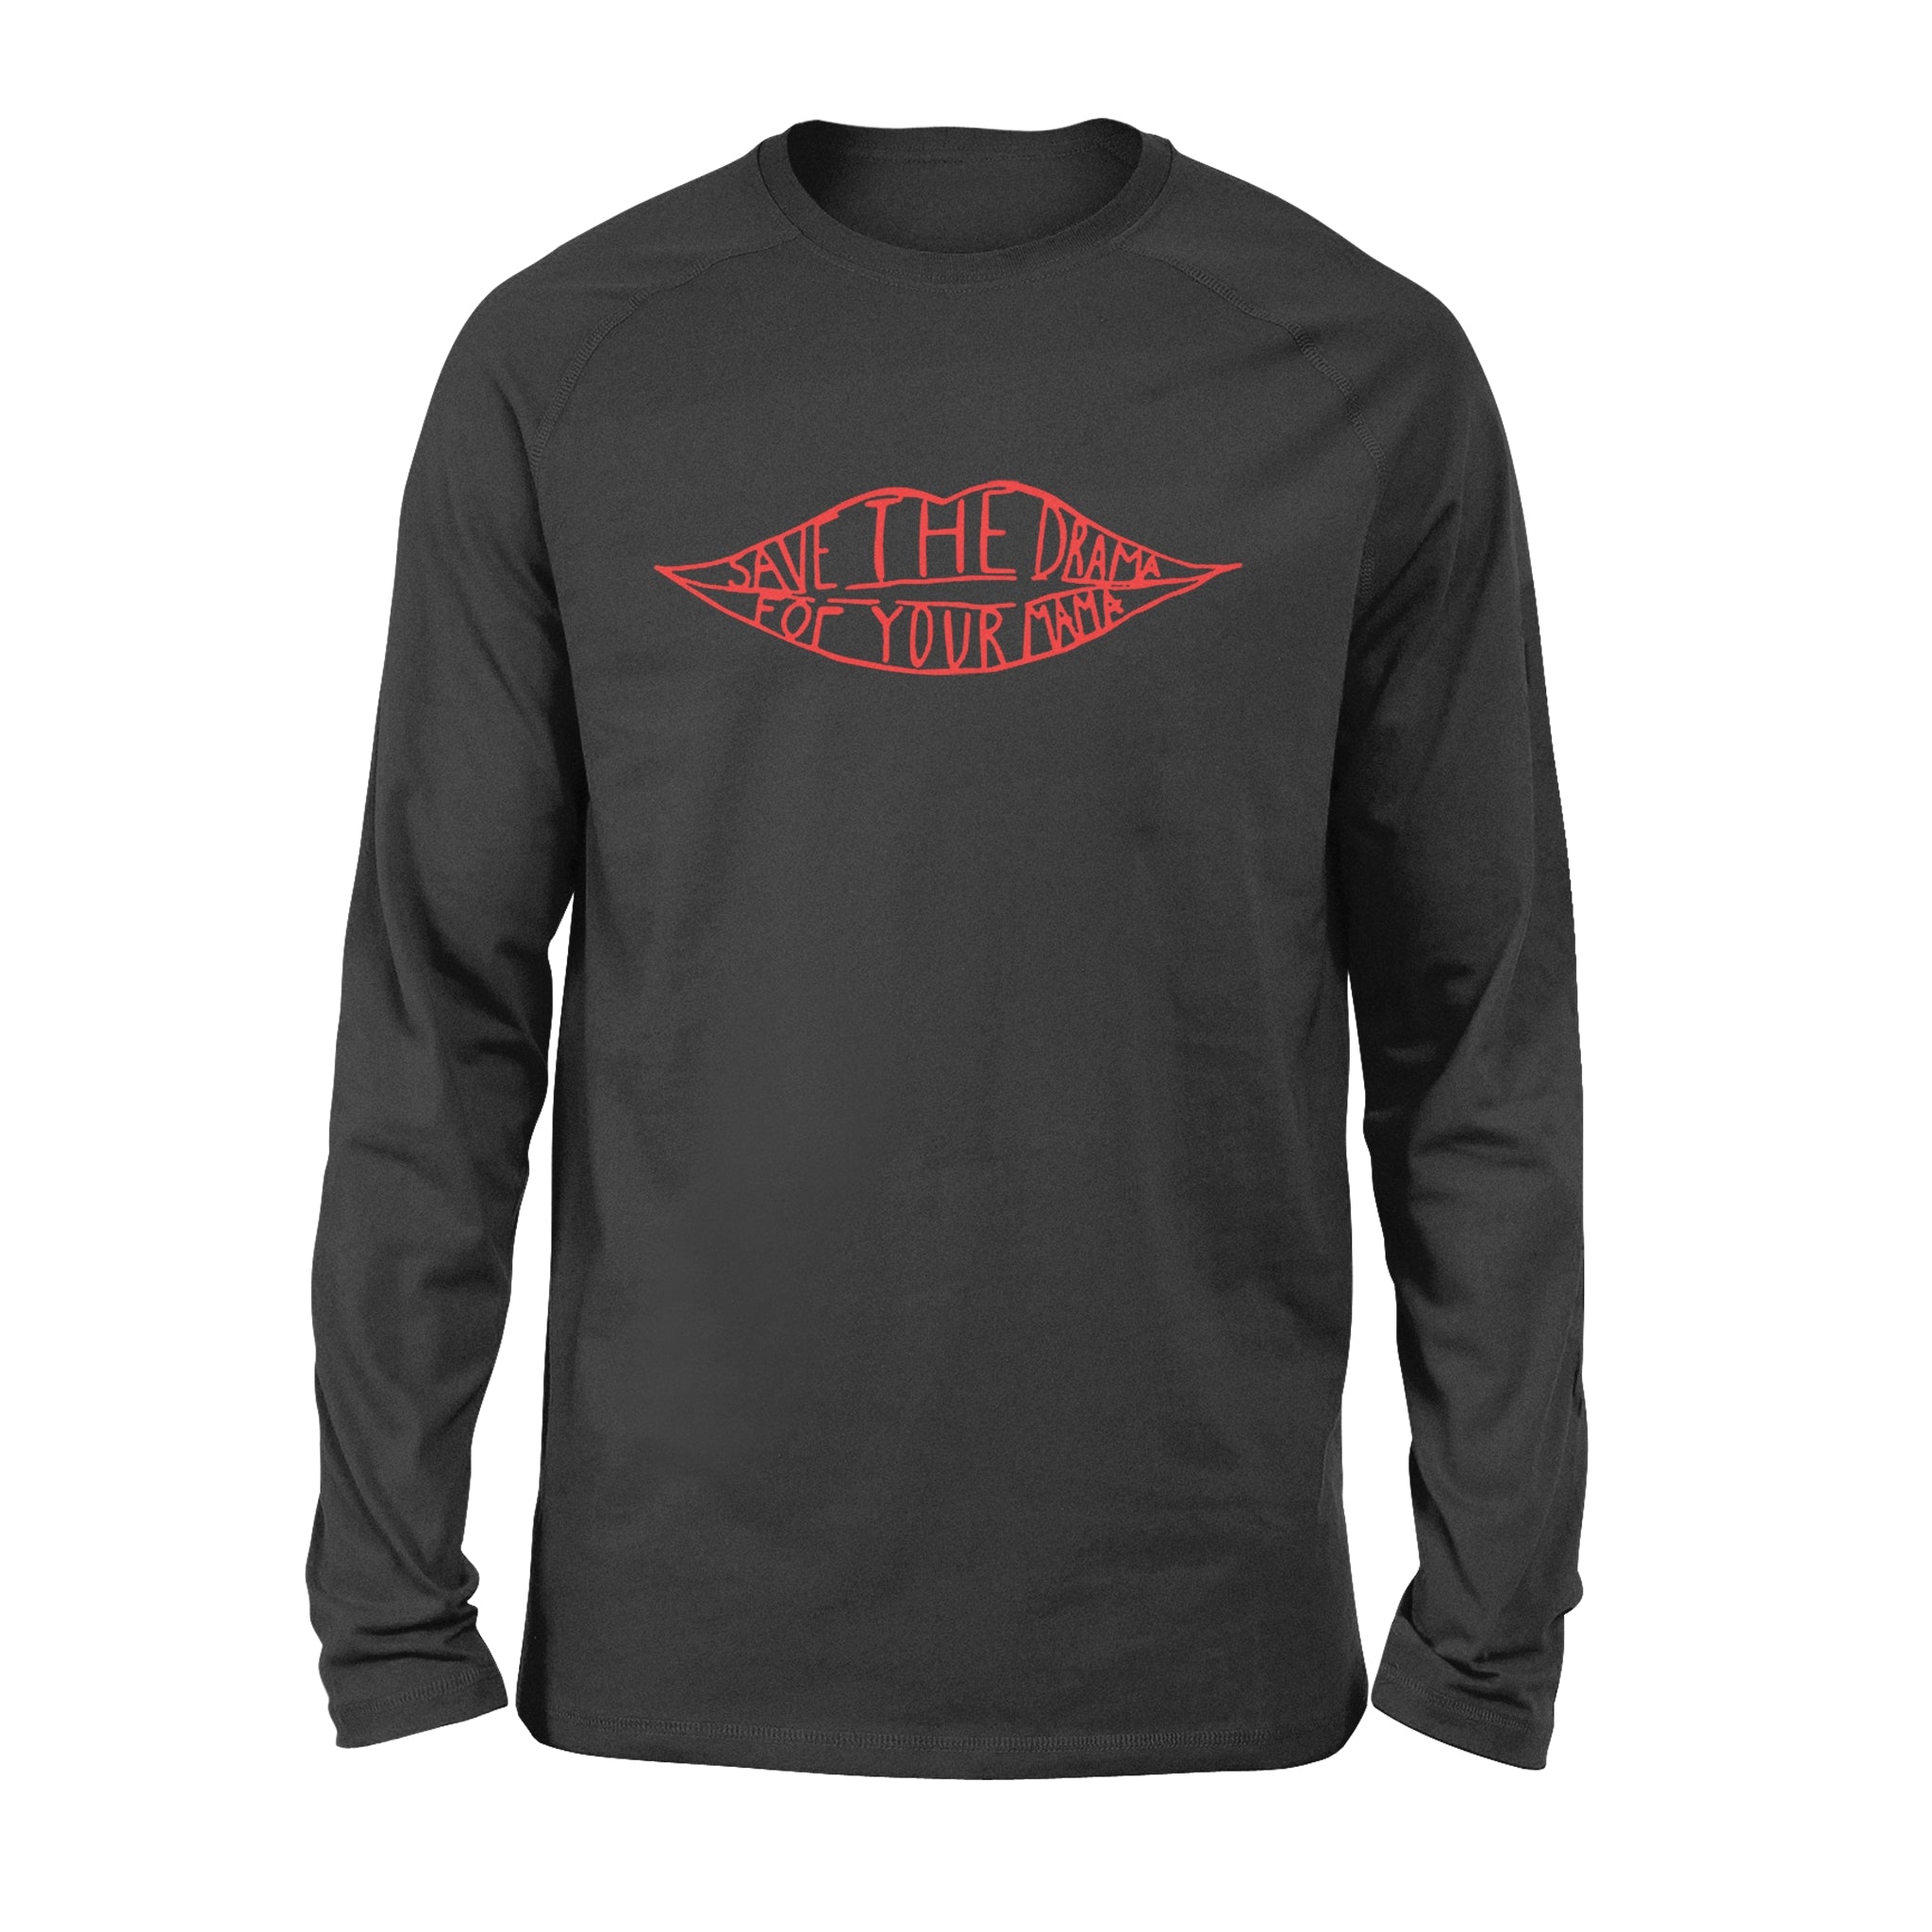 Save the drama for your mama - Standard Long Sleeve